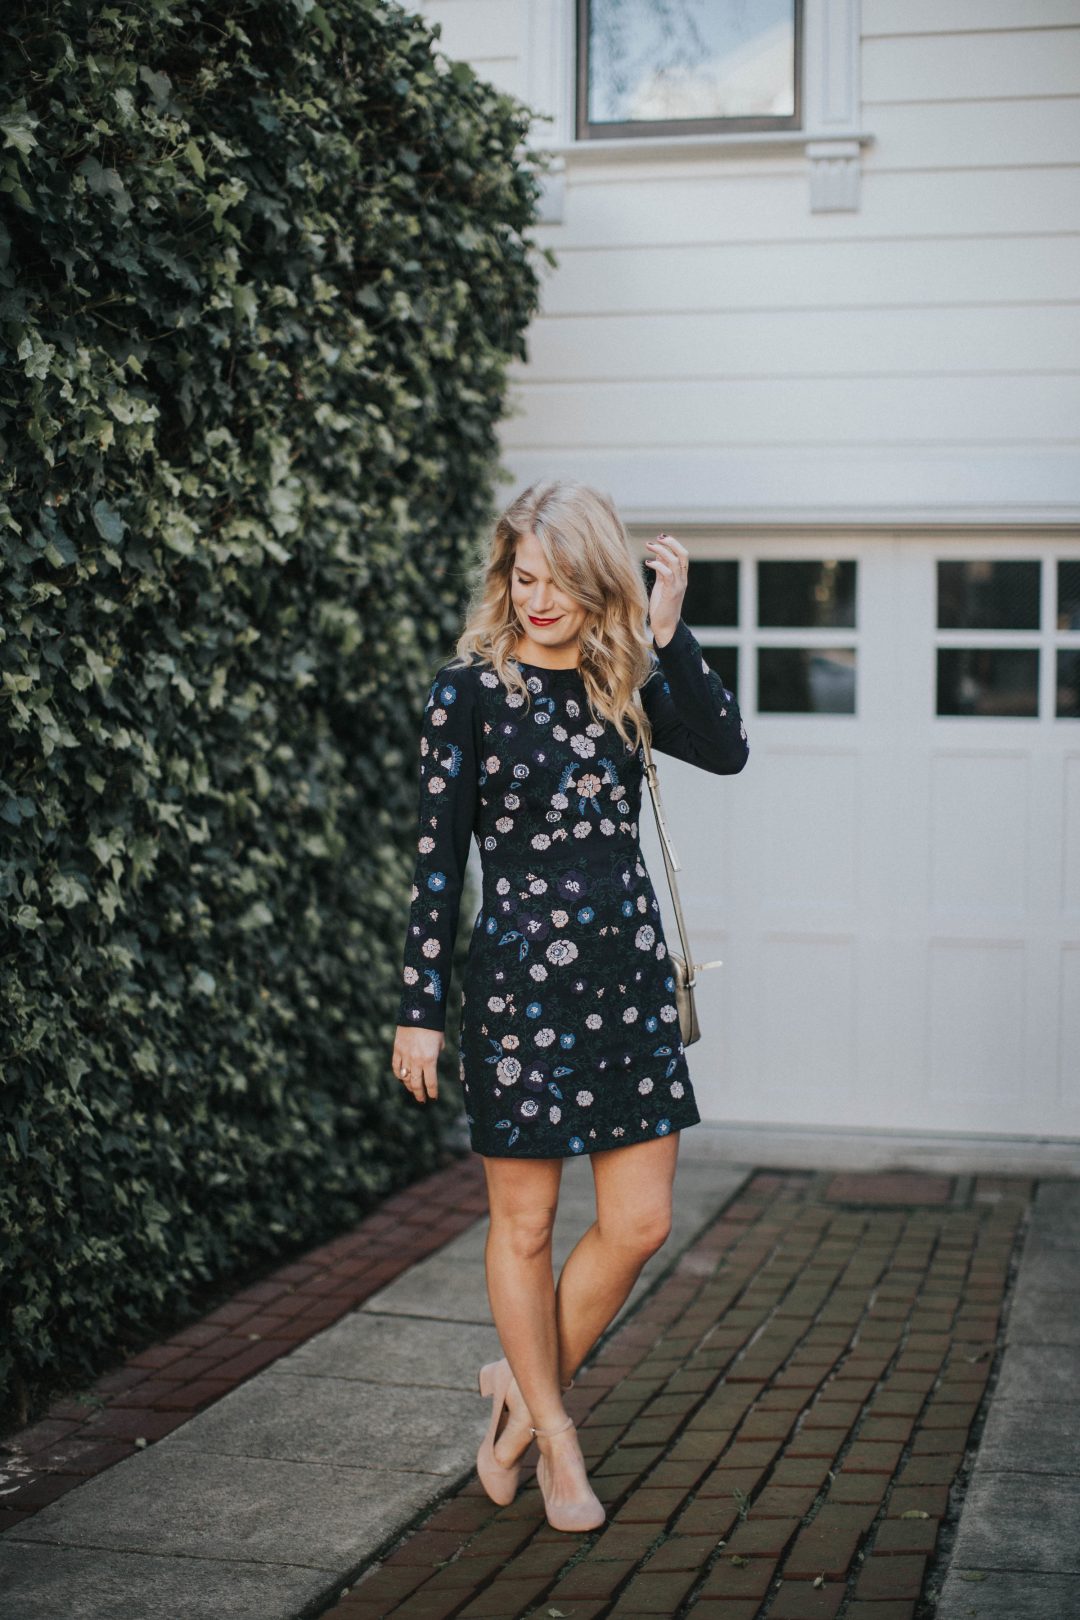 Floral Club Monaco Dress with Suede Blush Steve Madden Heels.